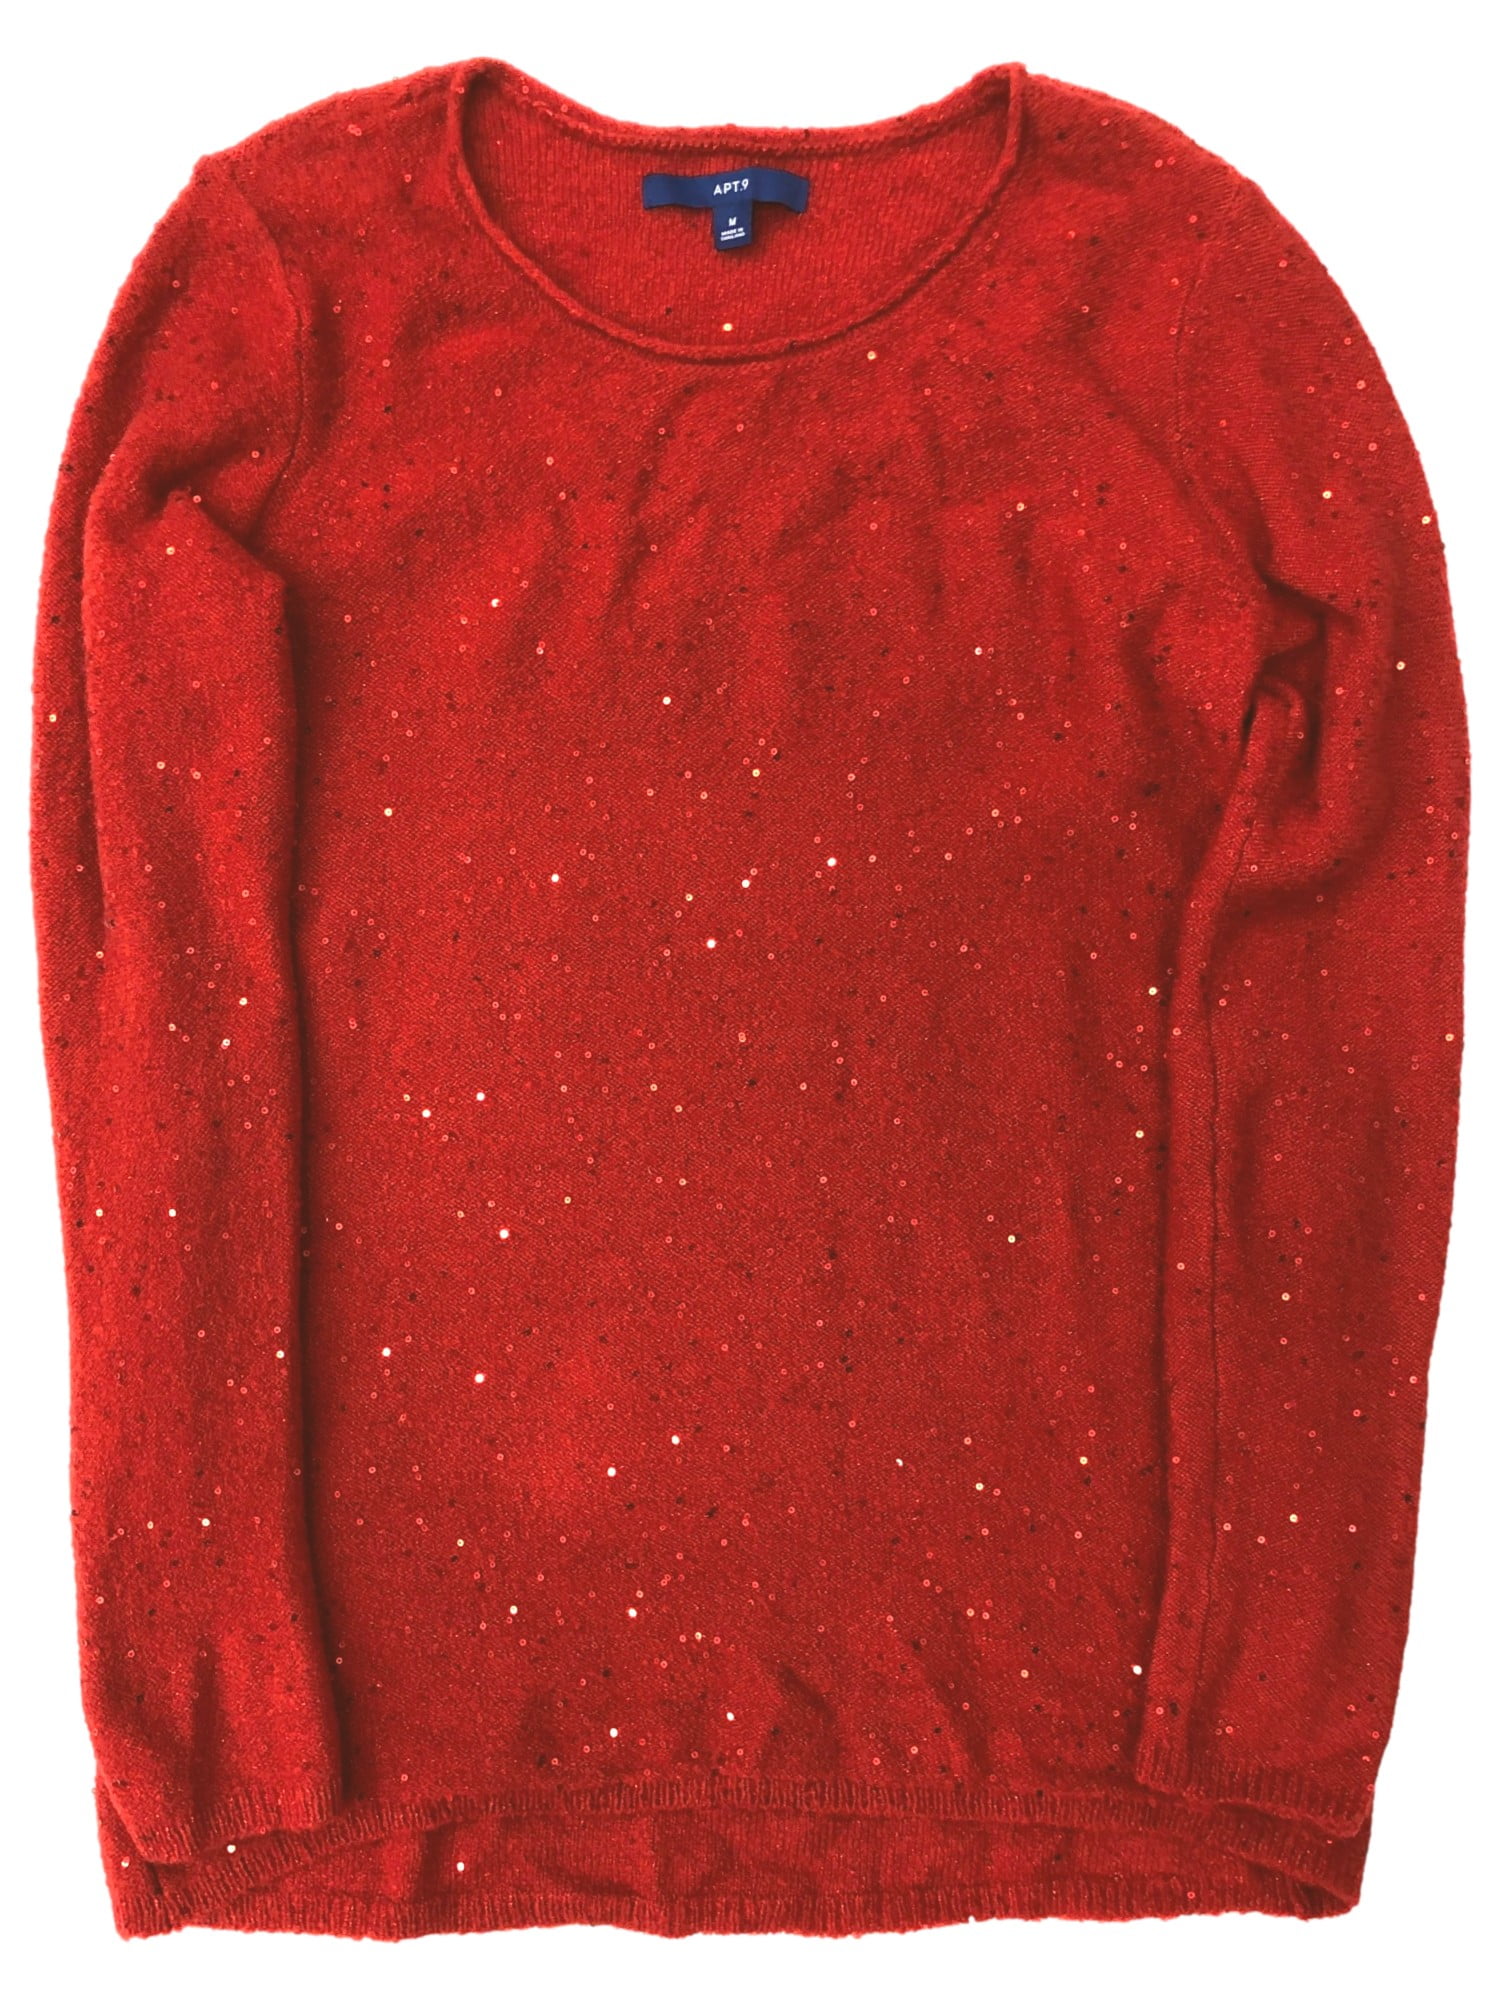 Womens Red Sequin Convertible Crew & Cowl Neck Christmas Holiday Sweater  Small